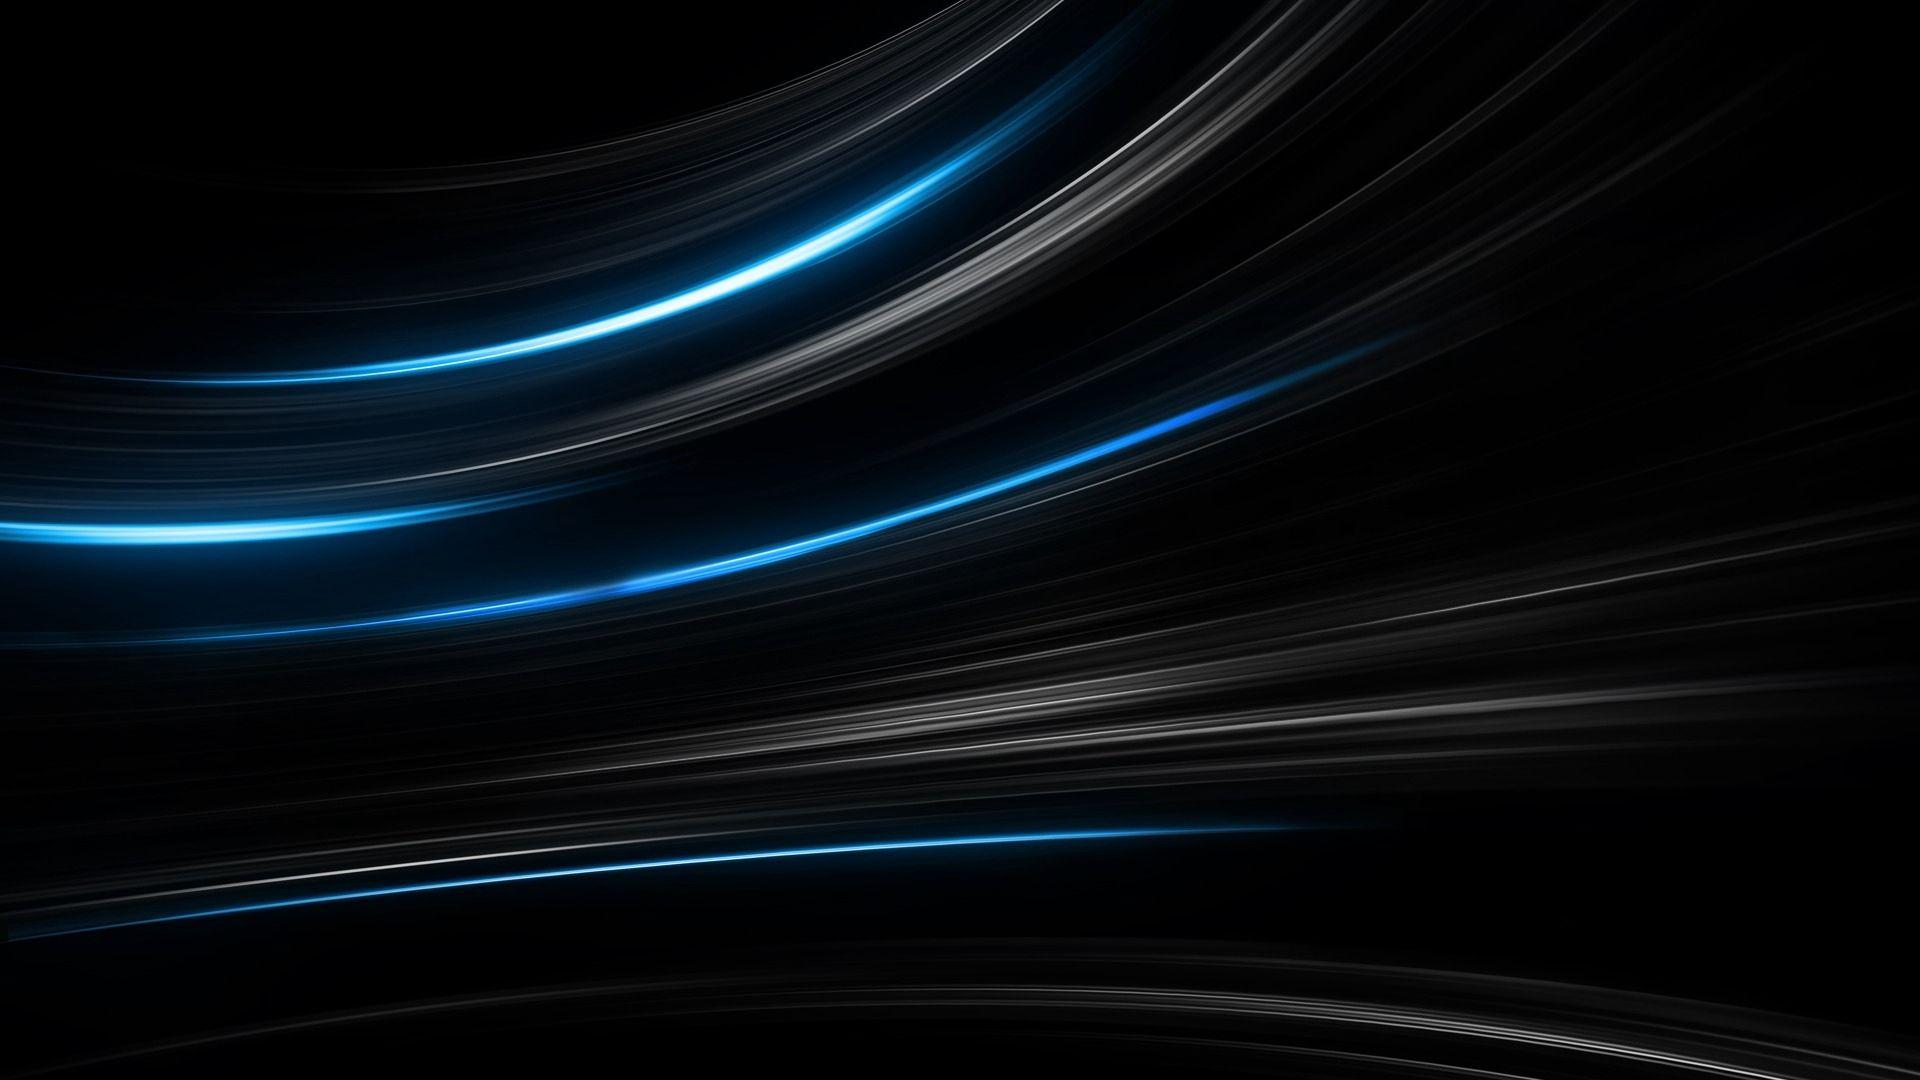 Download wallpaper 1920x1080 black, blue, abstract, stripes HD